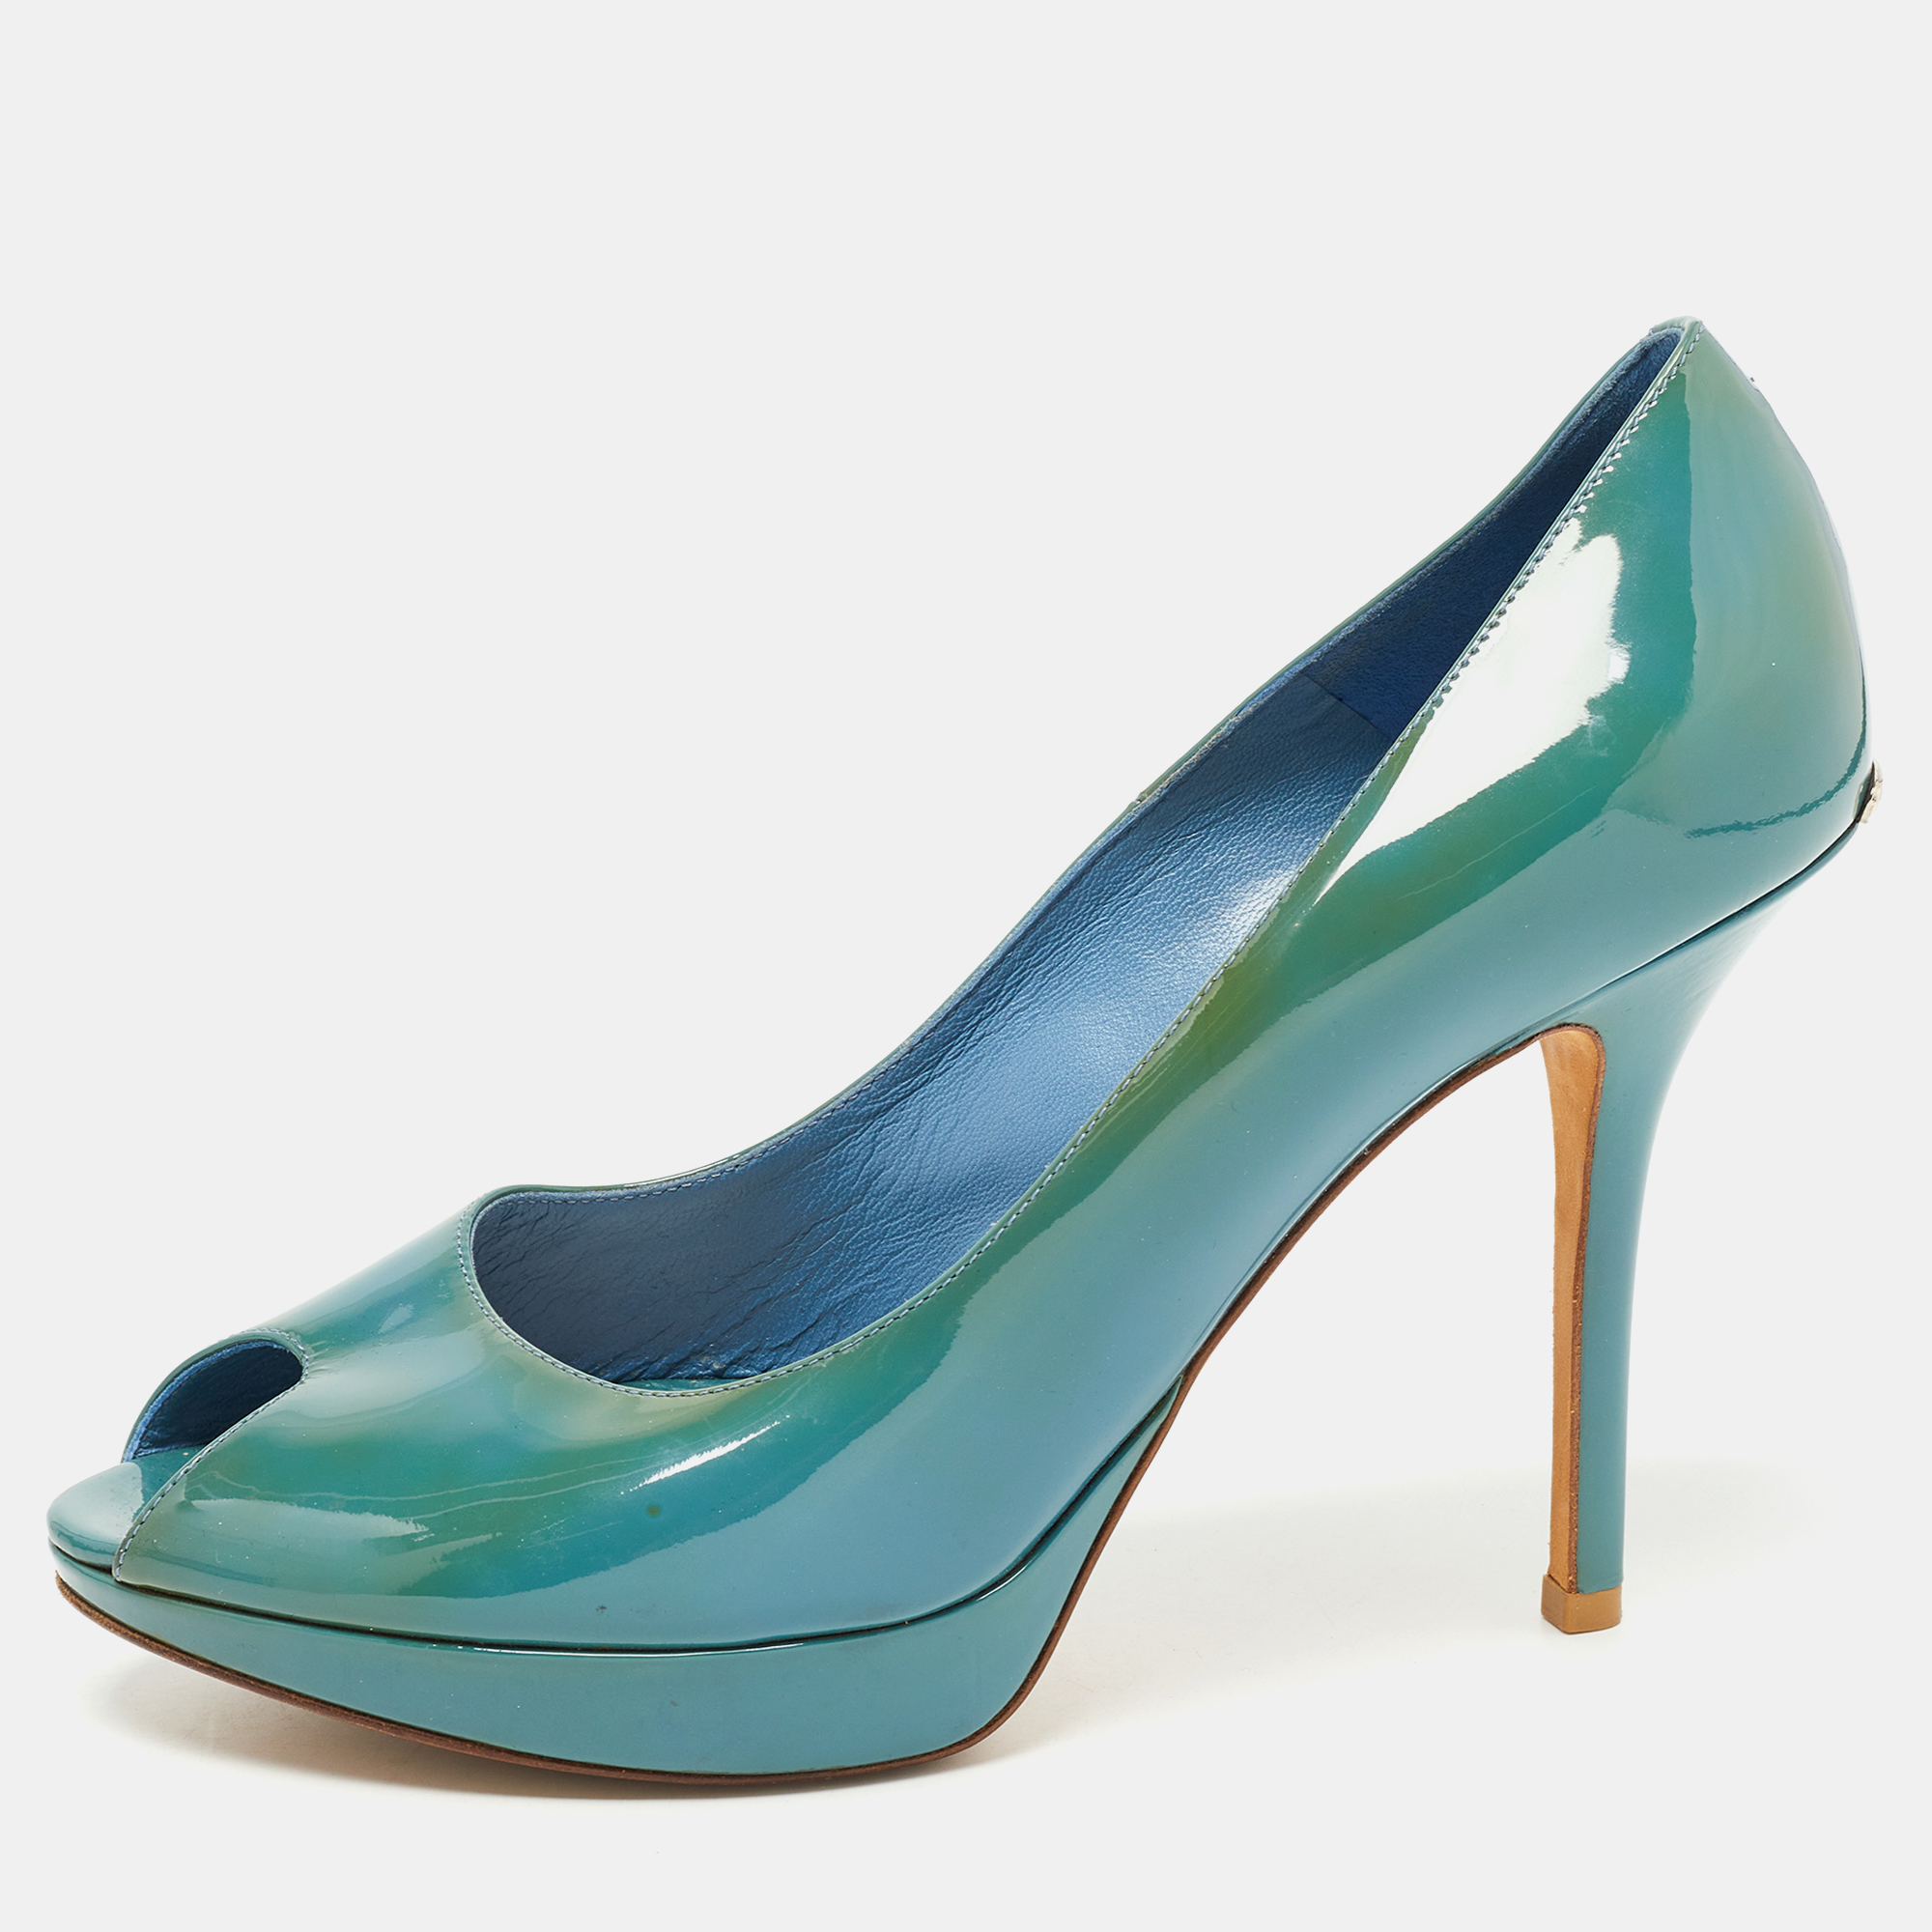 Every woman needs a pair of classy blue pumps and these Christian Dior Miss Dior peep toe pumps fit the bill perfectly. Made from patent leather this pair features comfortable insoles and 10.5 cm heels.